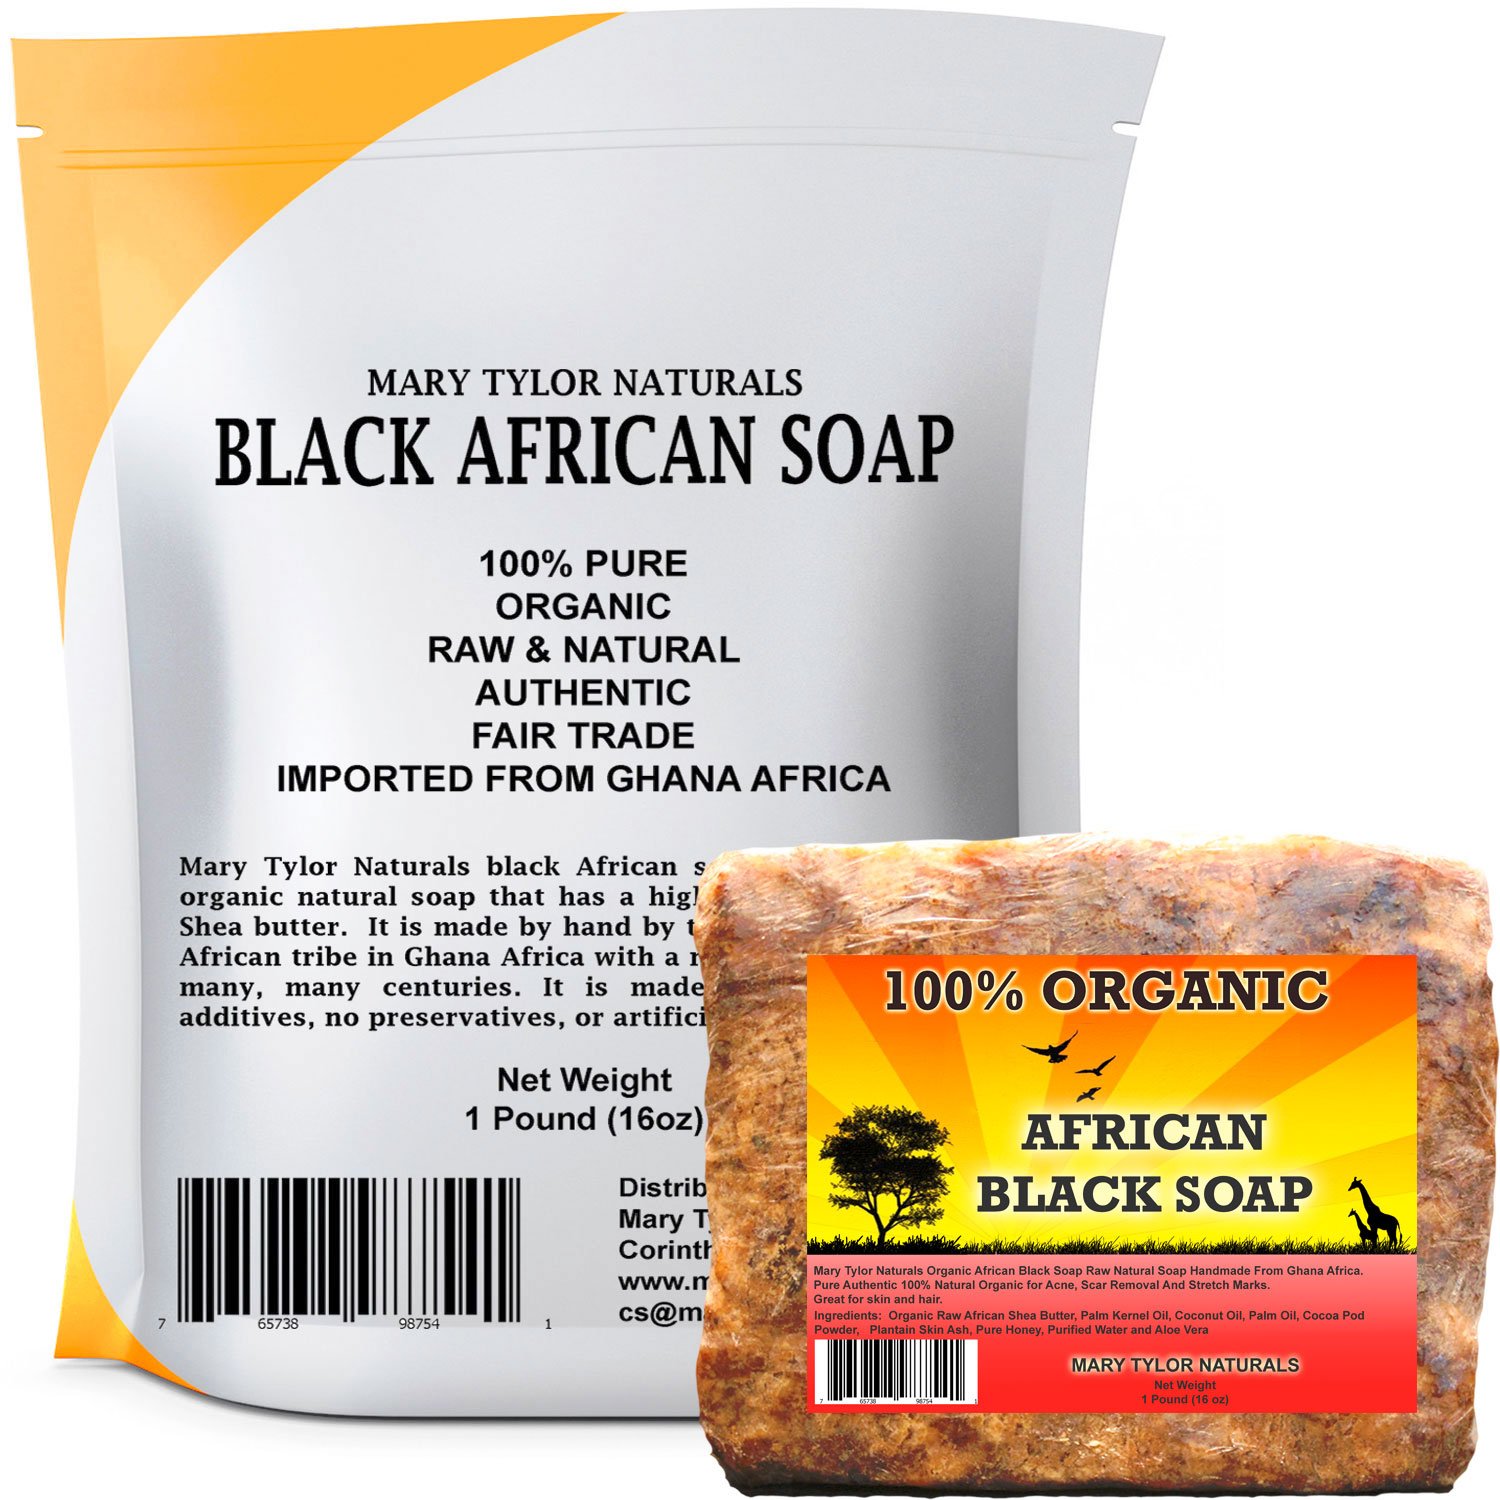 African Black Soap 1 lb 100% Natural Raw African Black Soap for Acne ...